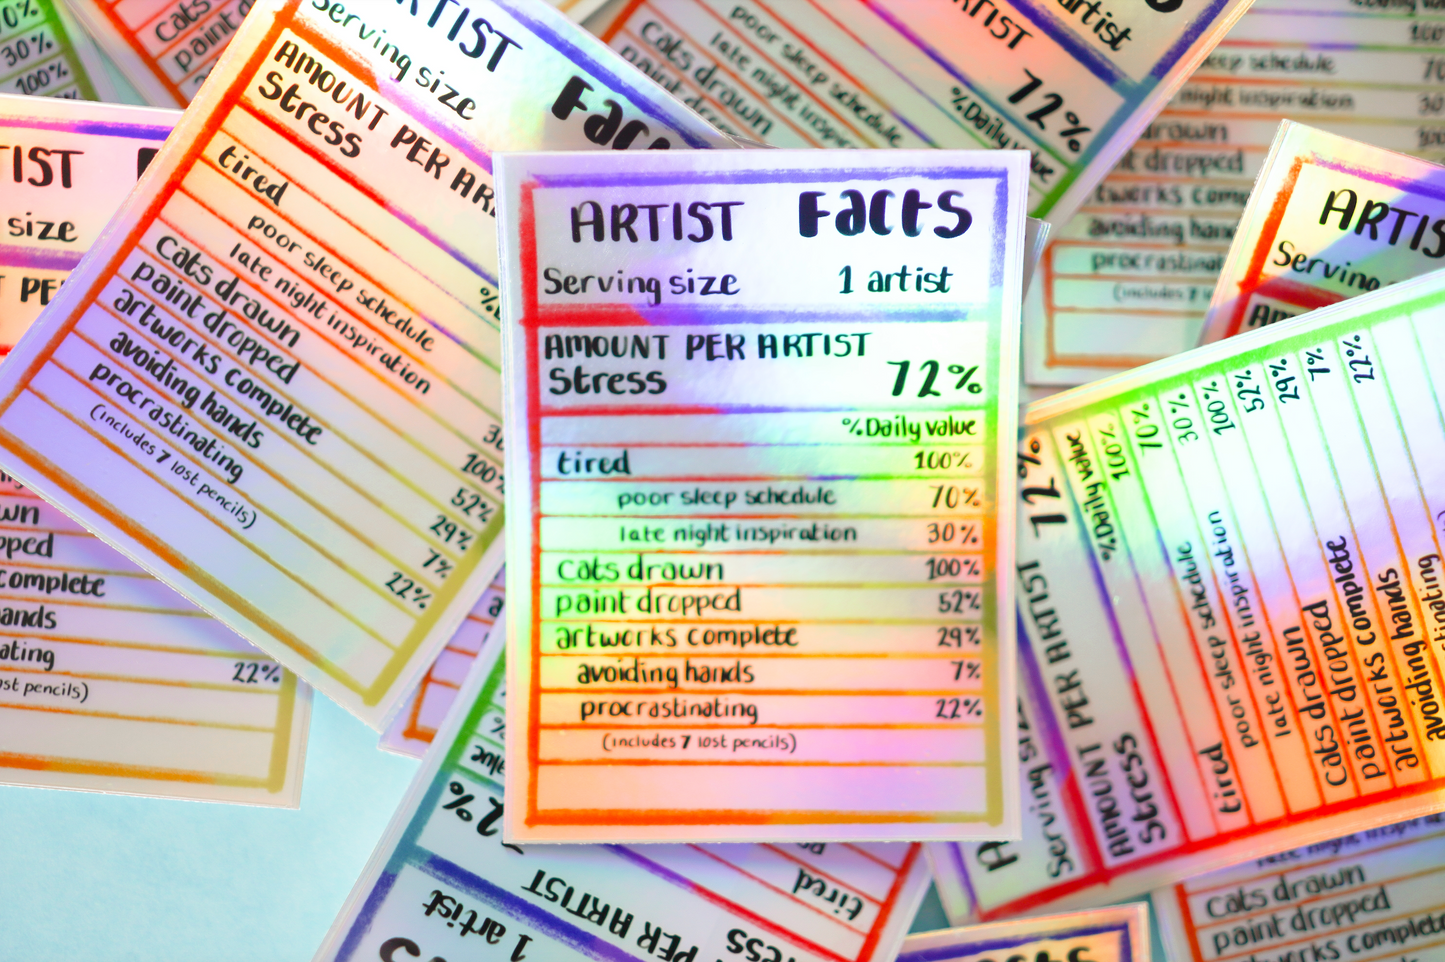 Artist Facts Holographic Sticker